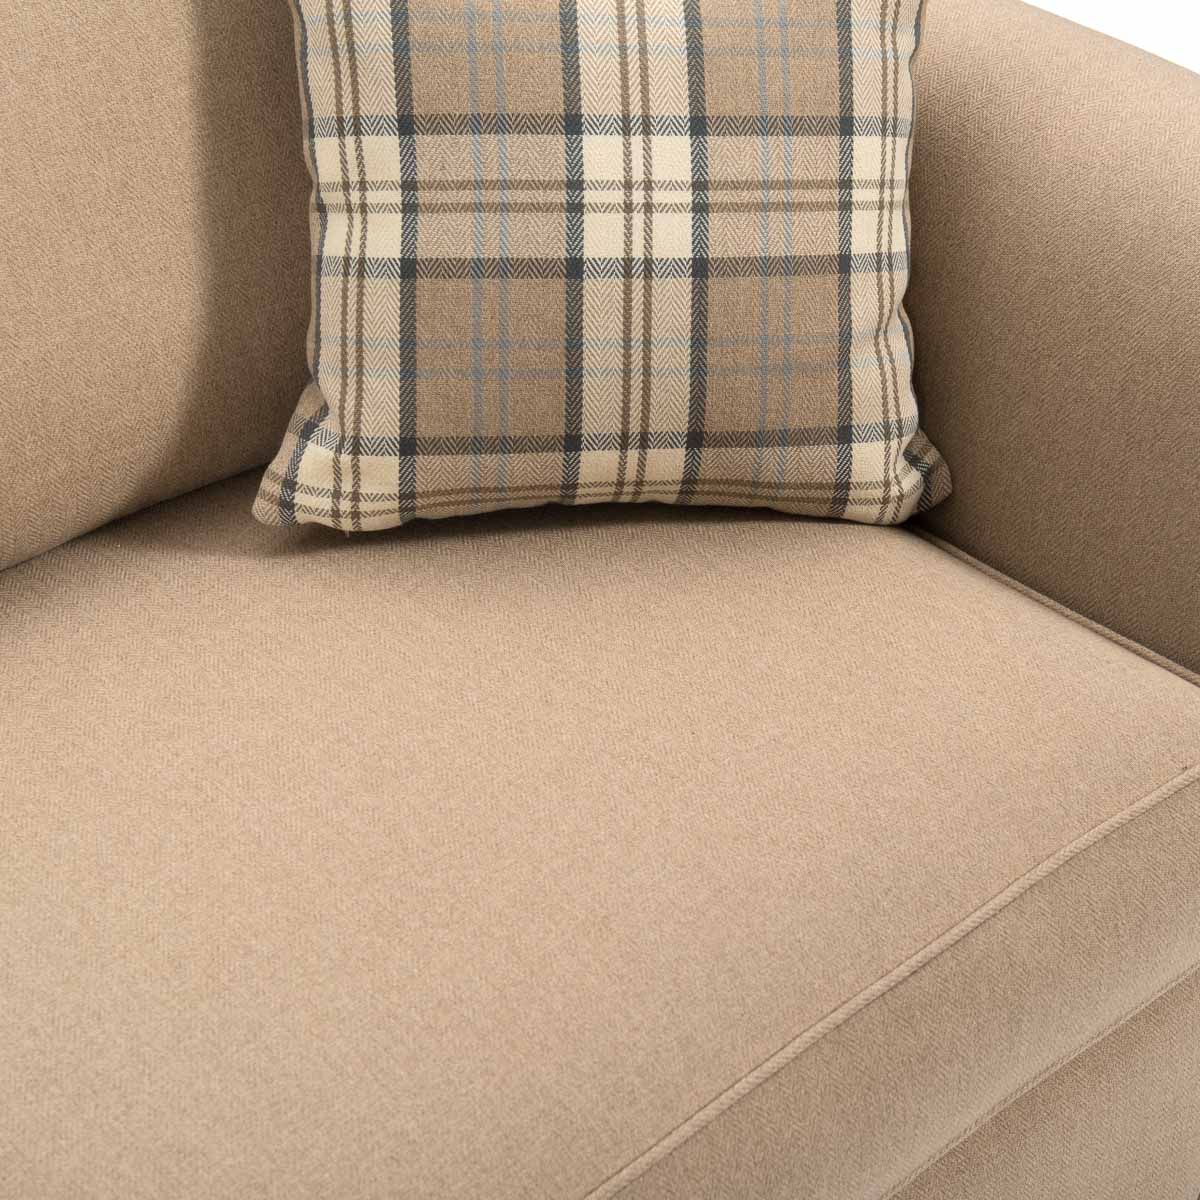 Lancaster 3 Seater Sofabed